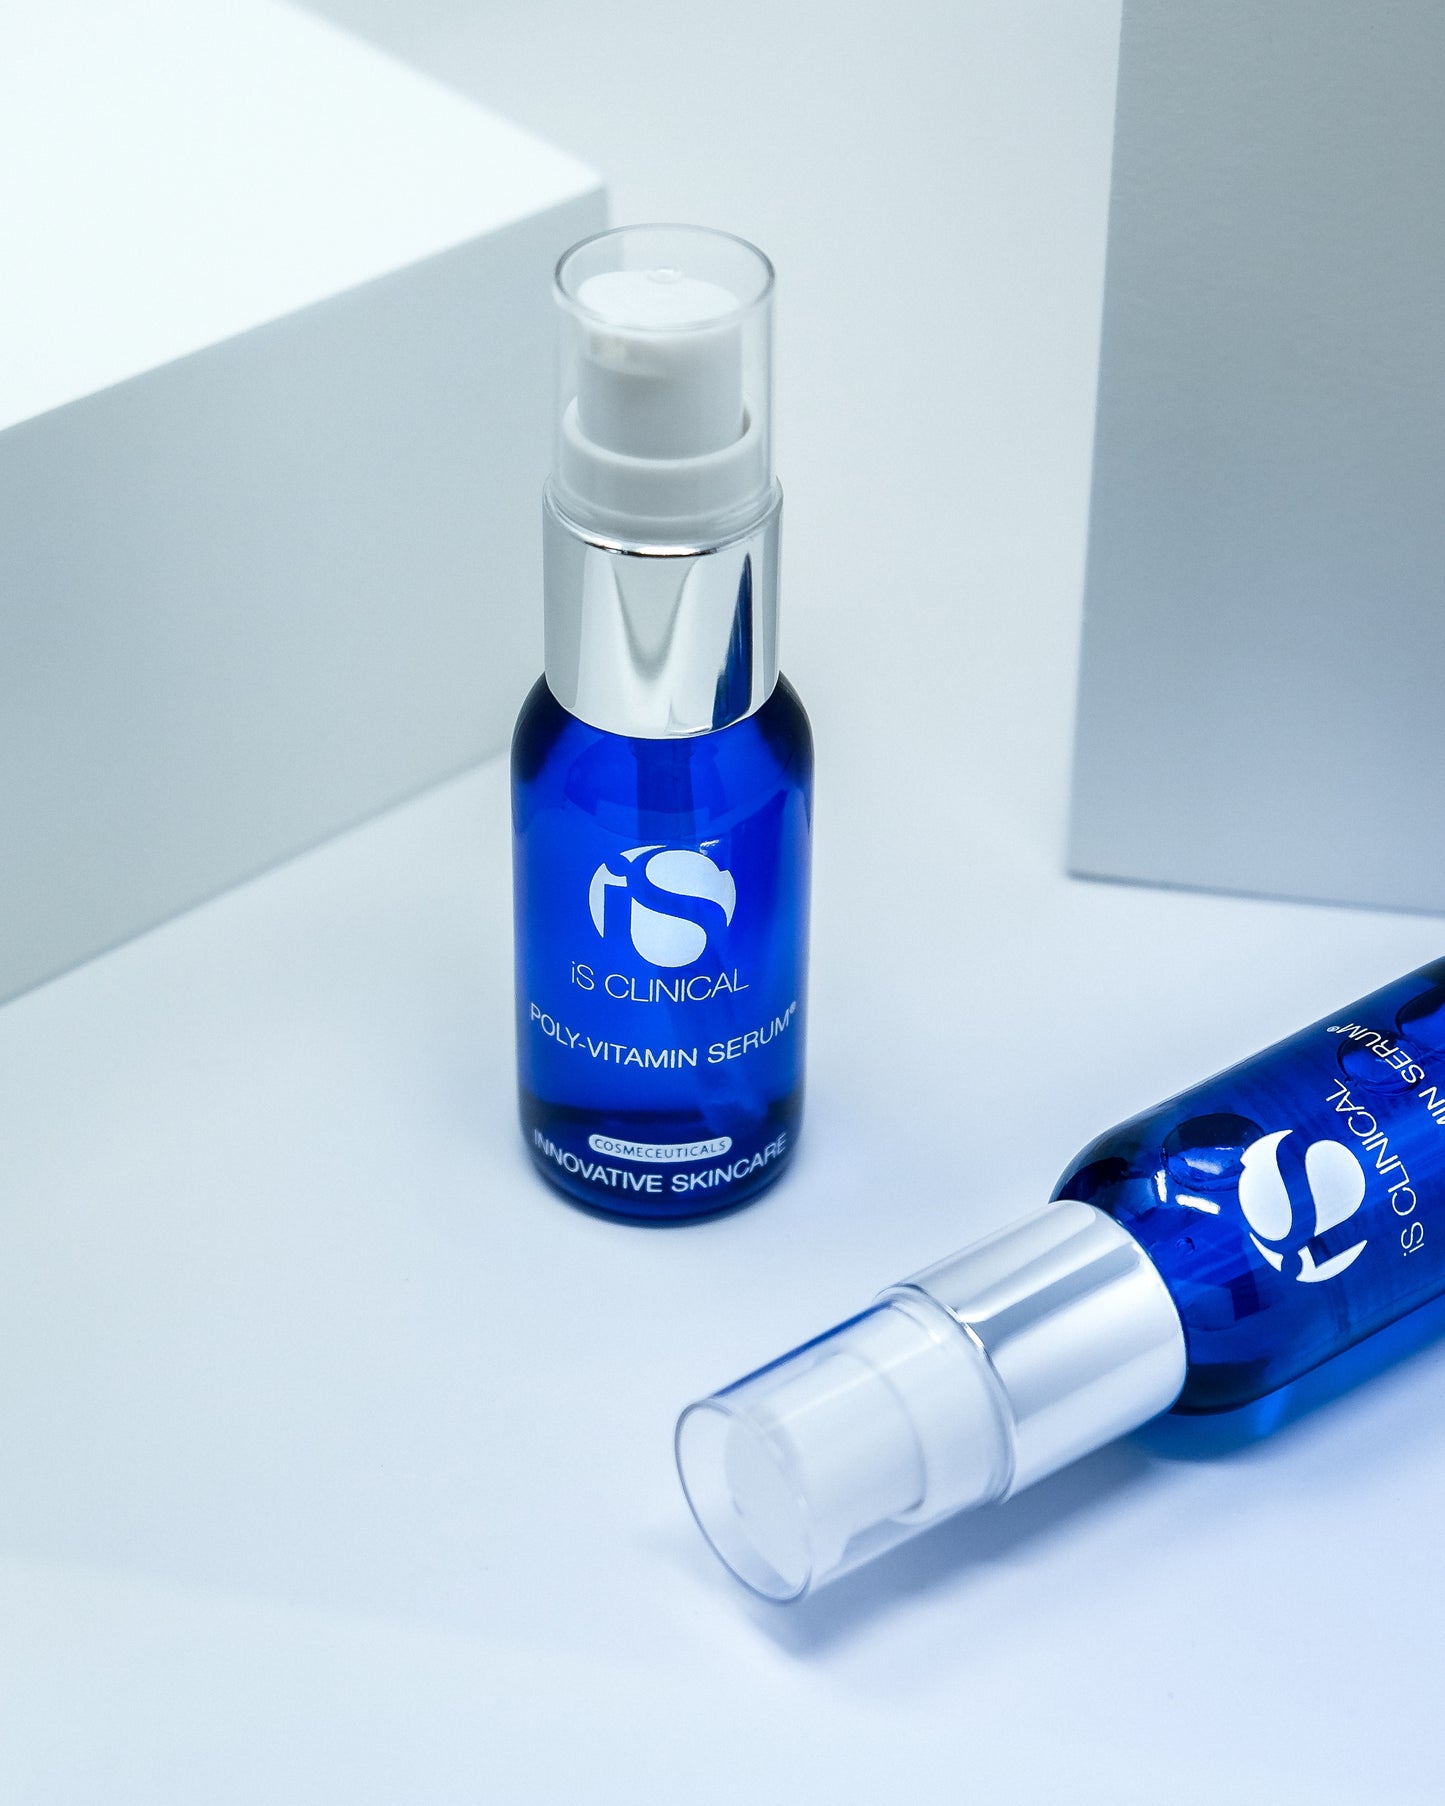 IS Clinical Polyvitamin Serum With Retinol